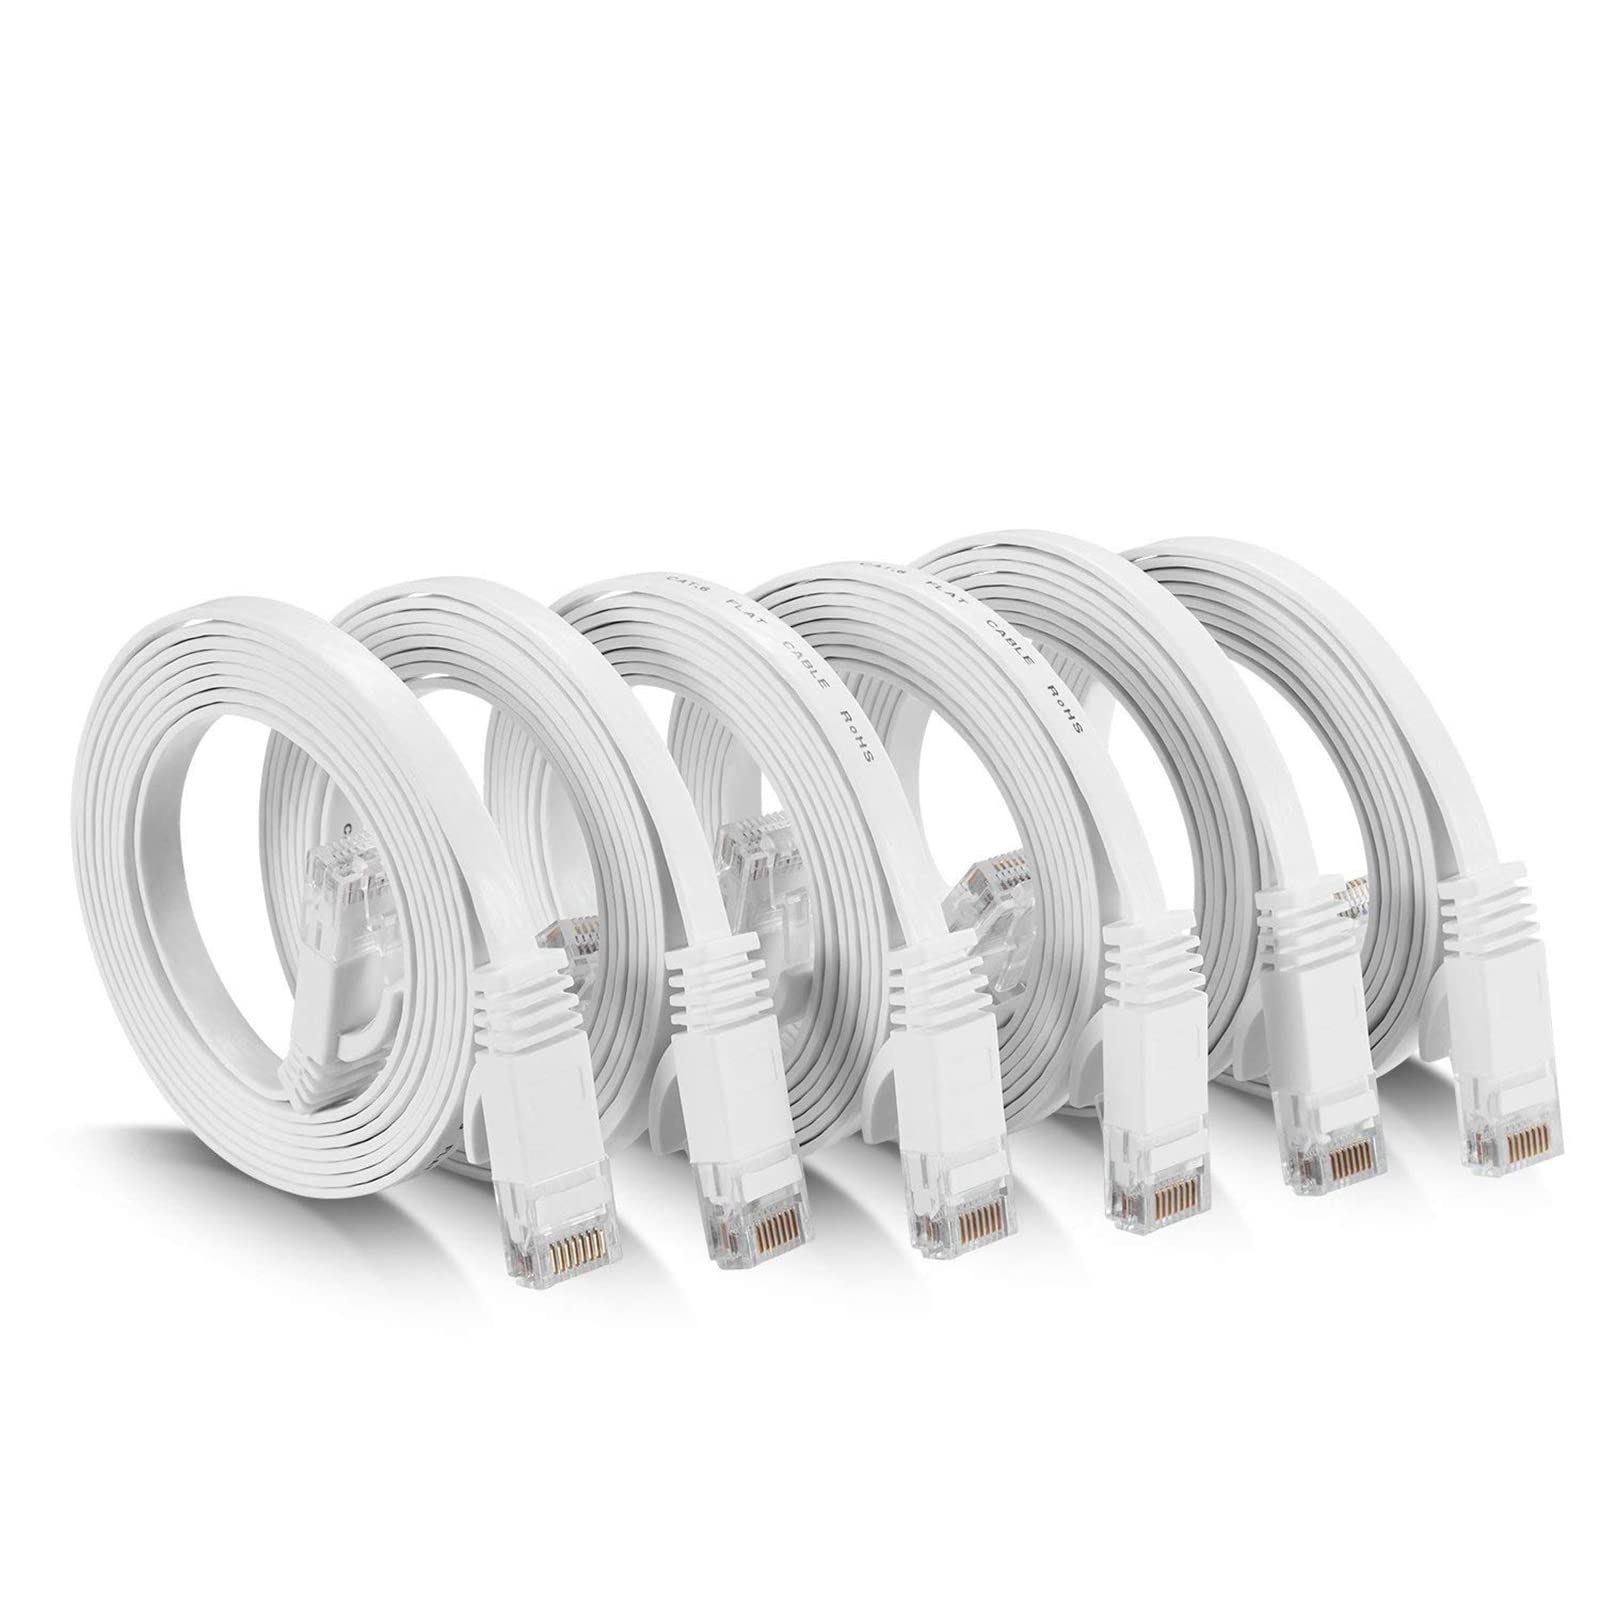 Cat6 Ethernet Cable 10Ft (10Pack), Outdoor&Indoor, 10Gbps Support Cat7 Network, Heavy Duty Flat LAN Internet Patch Cord, Solid Weatherproof High Speed Cable for Router, Modem, Switch, Xbox, PS4, White